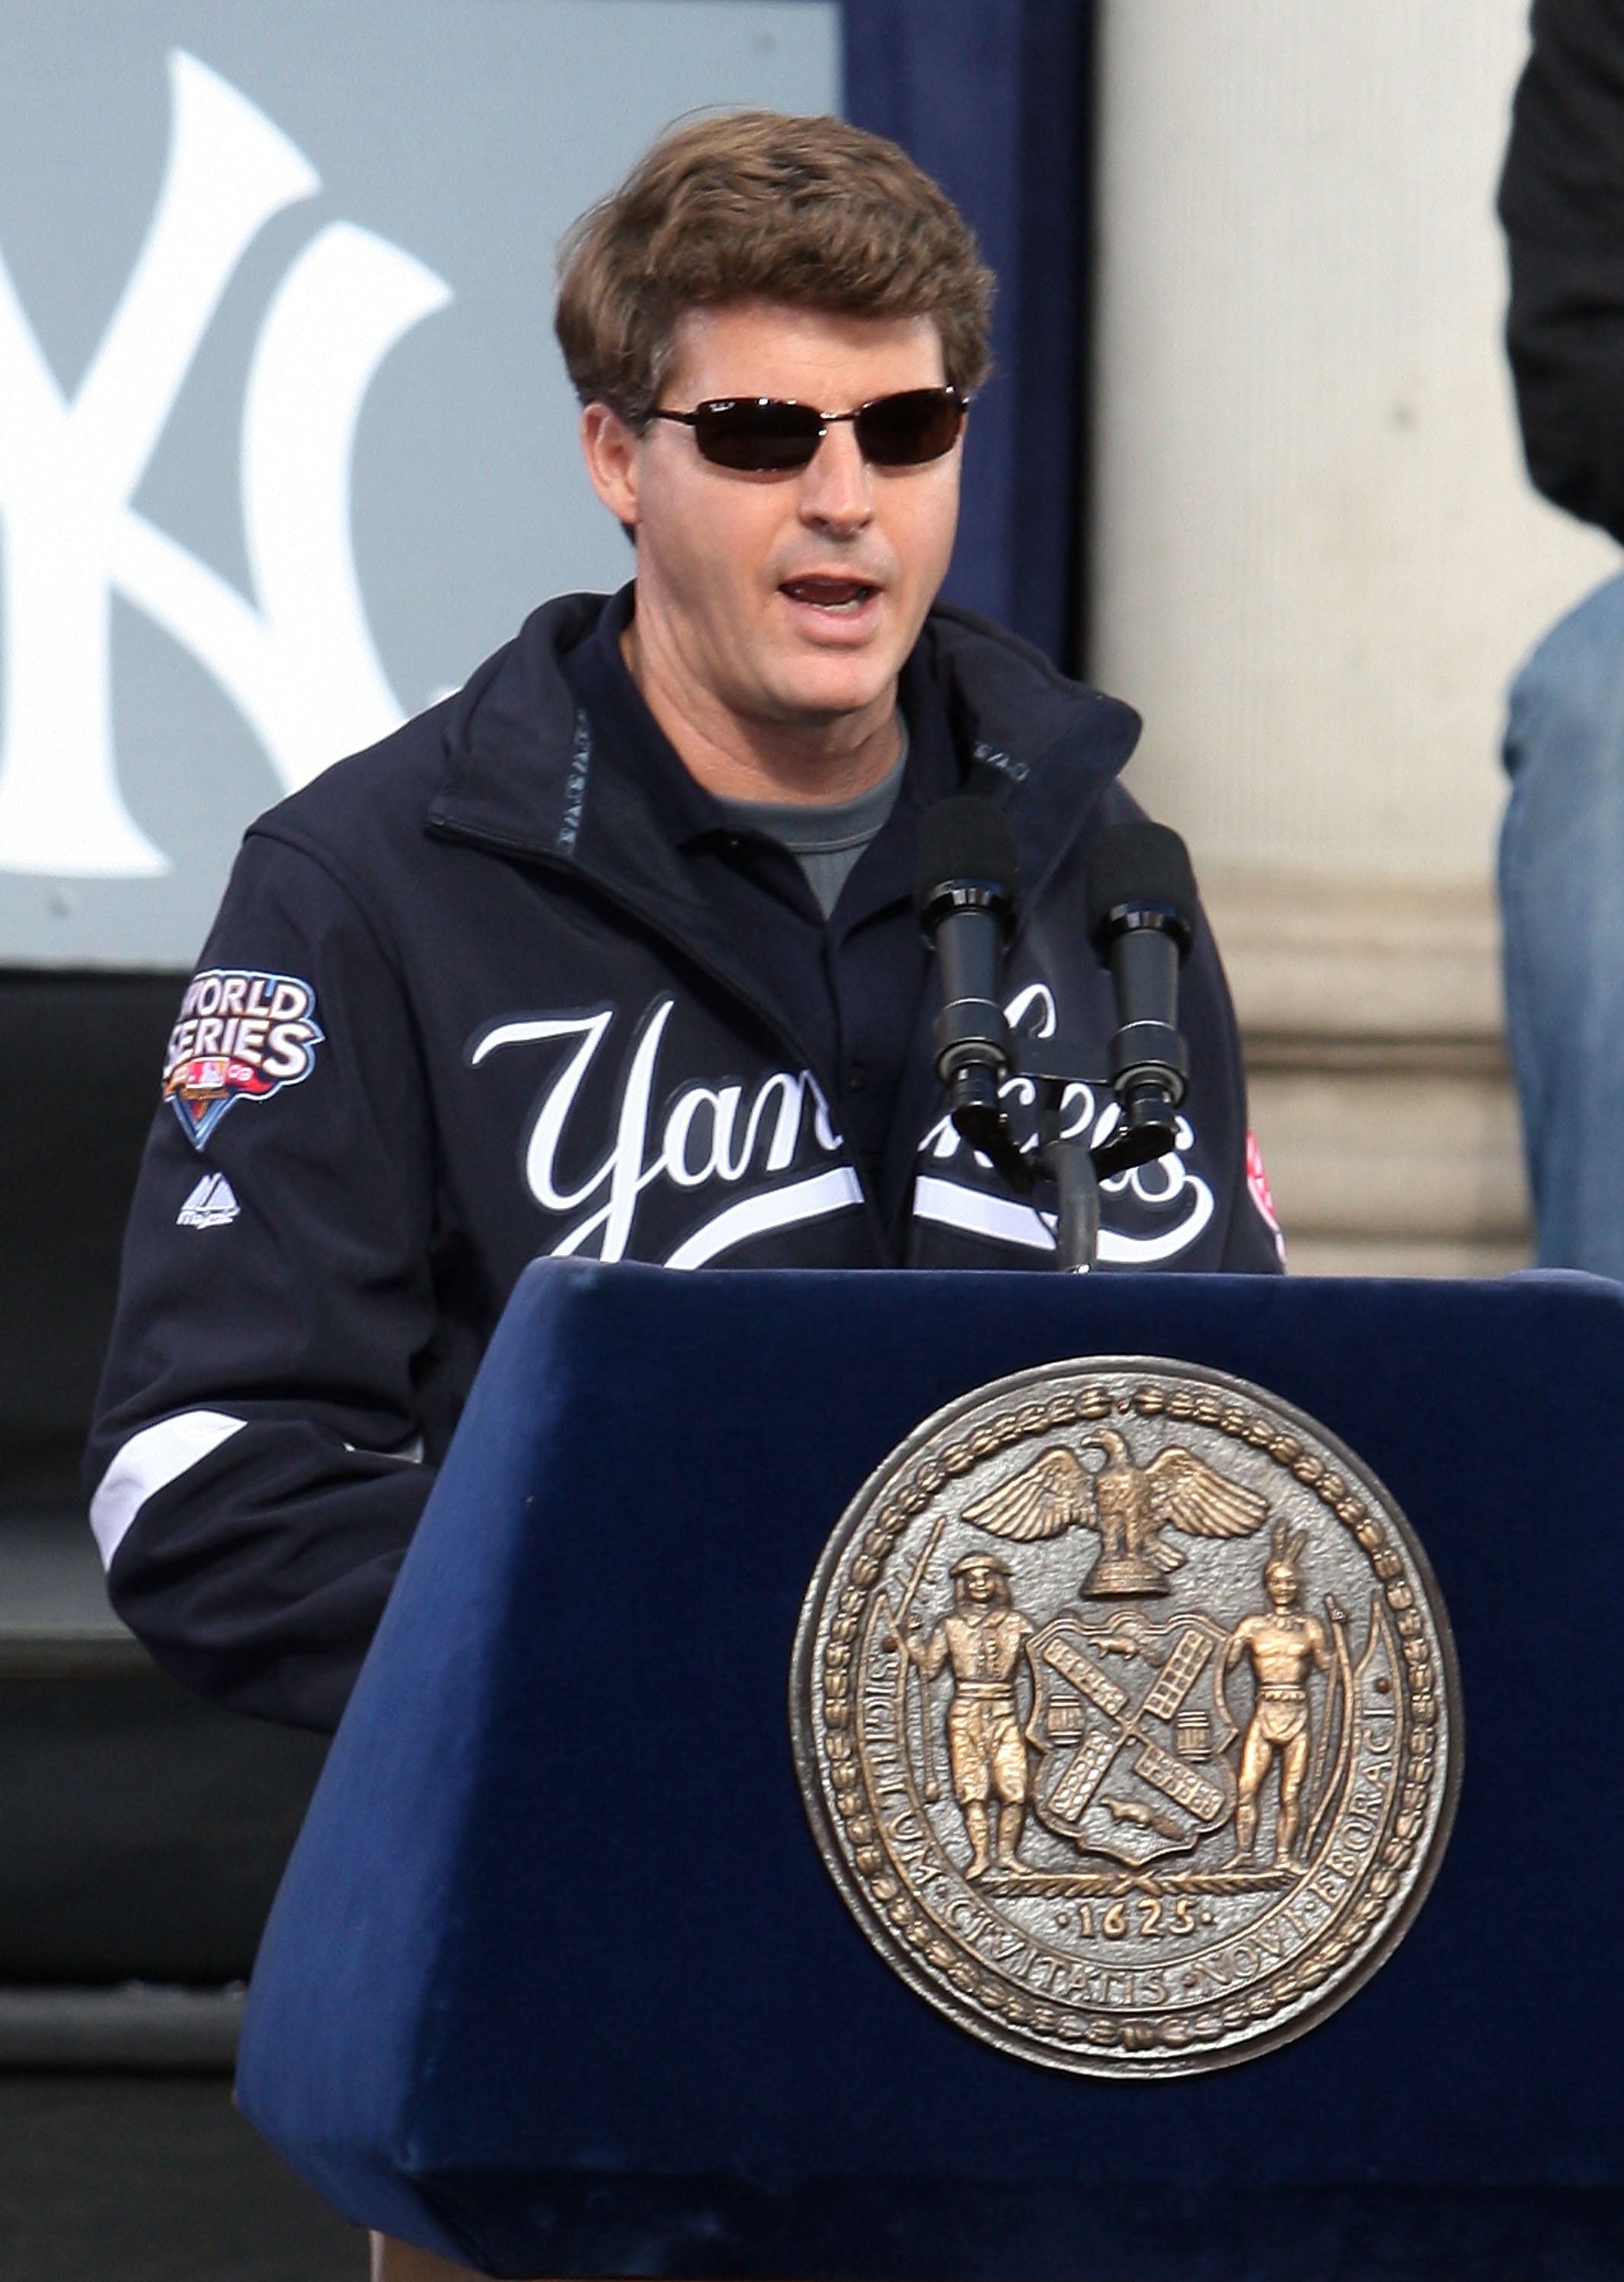 NEW YORK - NOVEMBER 06:  Managing General Partner Hal Steinbrenner of the New York Yankees speaks during the New York Yankees World Series Victory Celebration at City Hall on November 6, 2009 in New York, New York.  (Photo by Jim McIsaac/Getty Images)